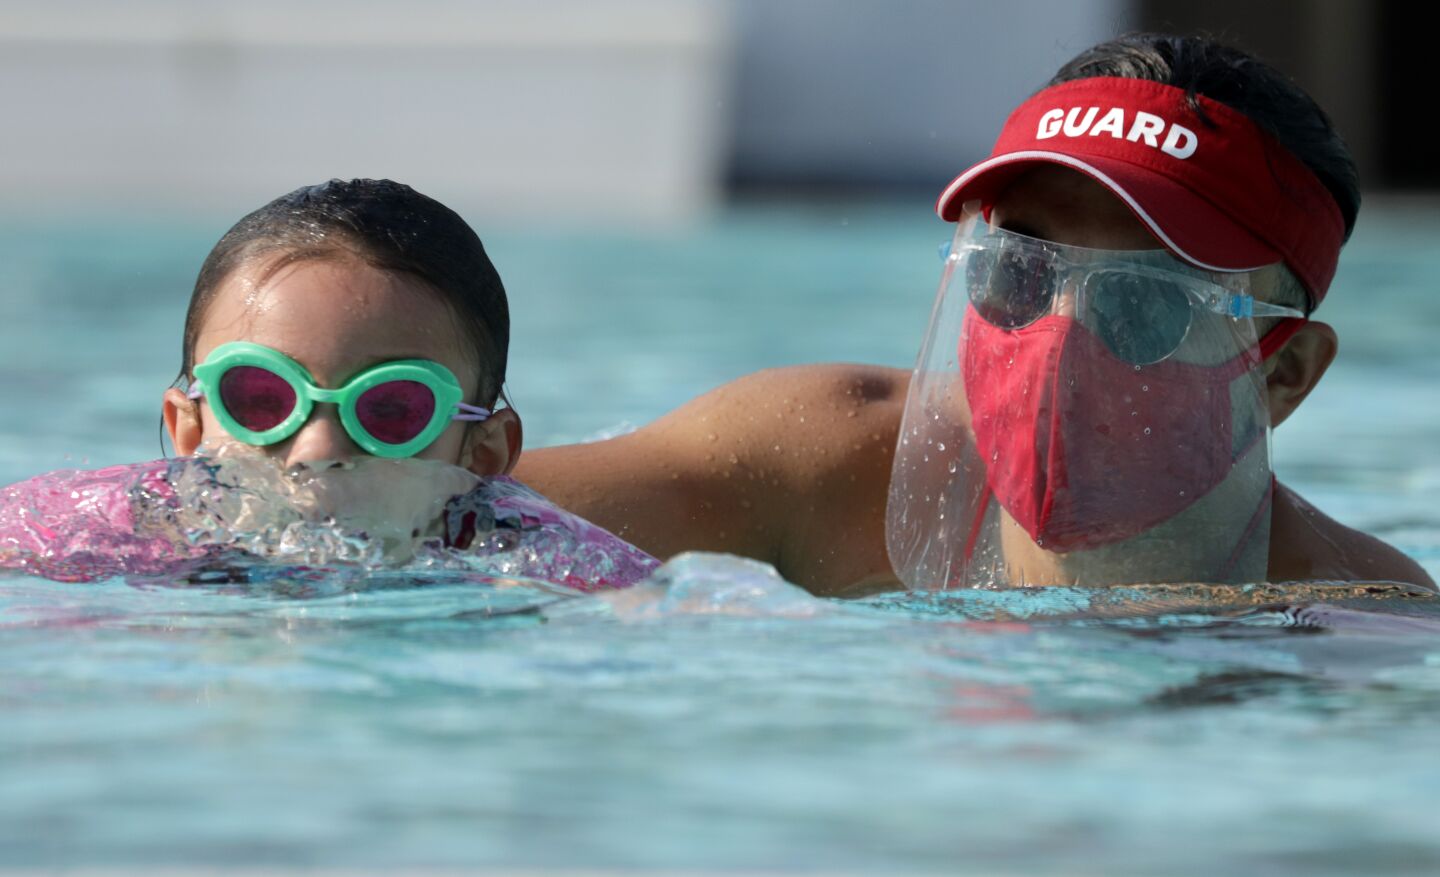 Lifeguard Michael Alfaro works with Kaila Holliday, 5, during a swim lesson in Palmdale.